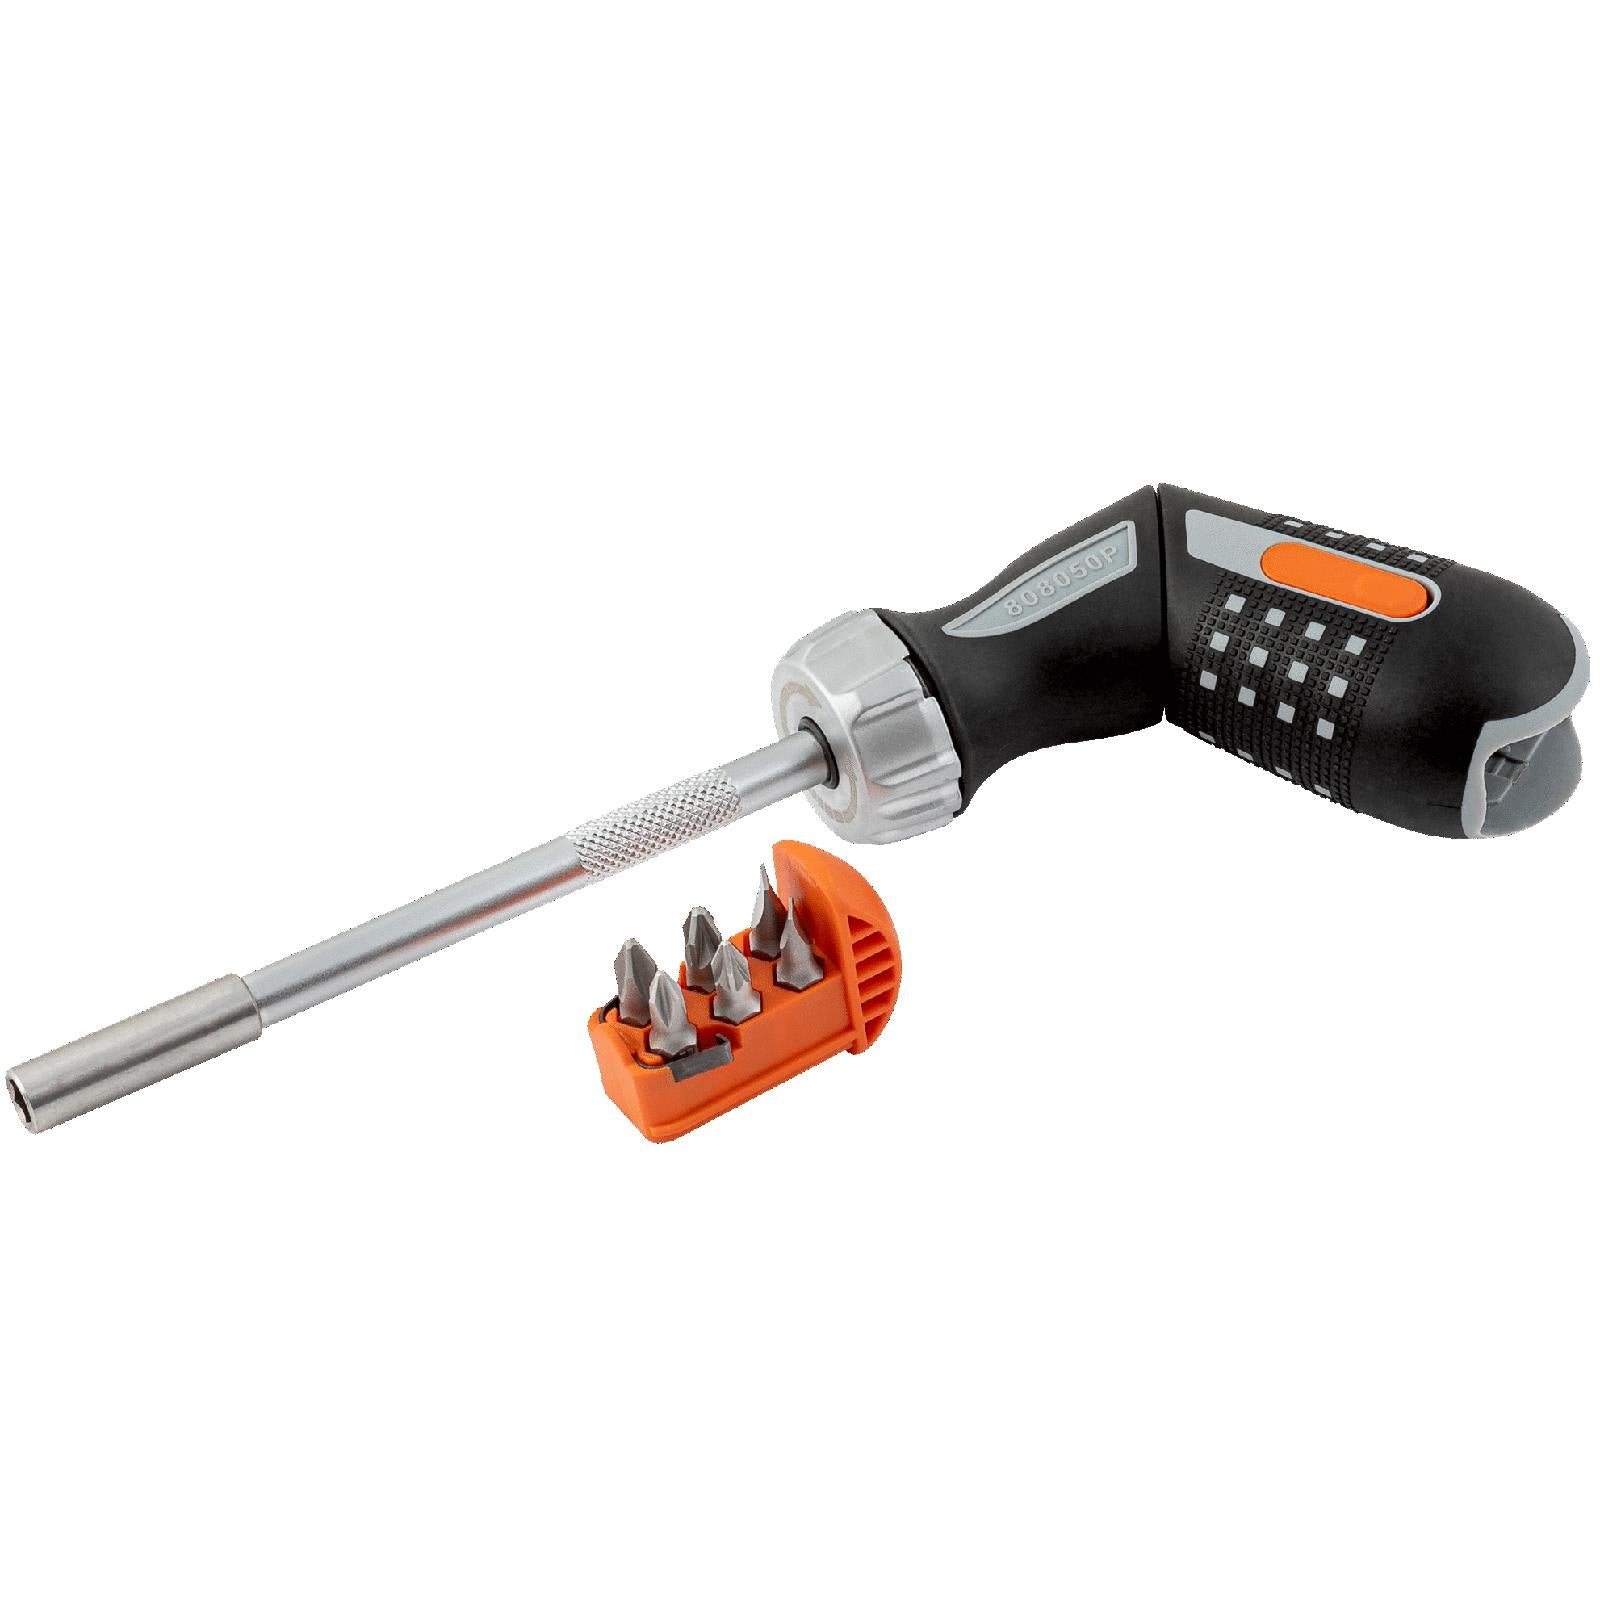 Bahco Ratchet Screwdriver Pistol Grip with 1/4" Hex Bits Phillips Slotted